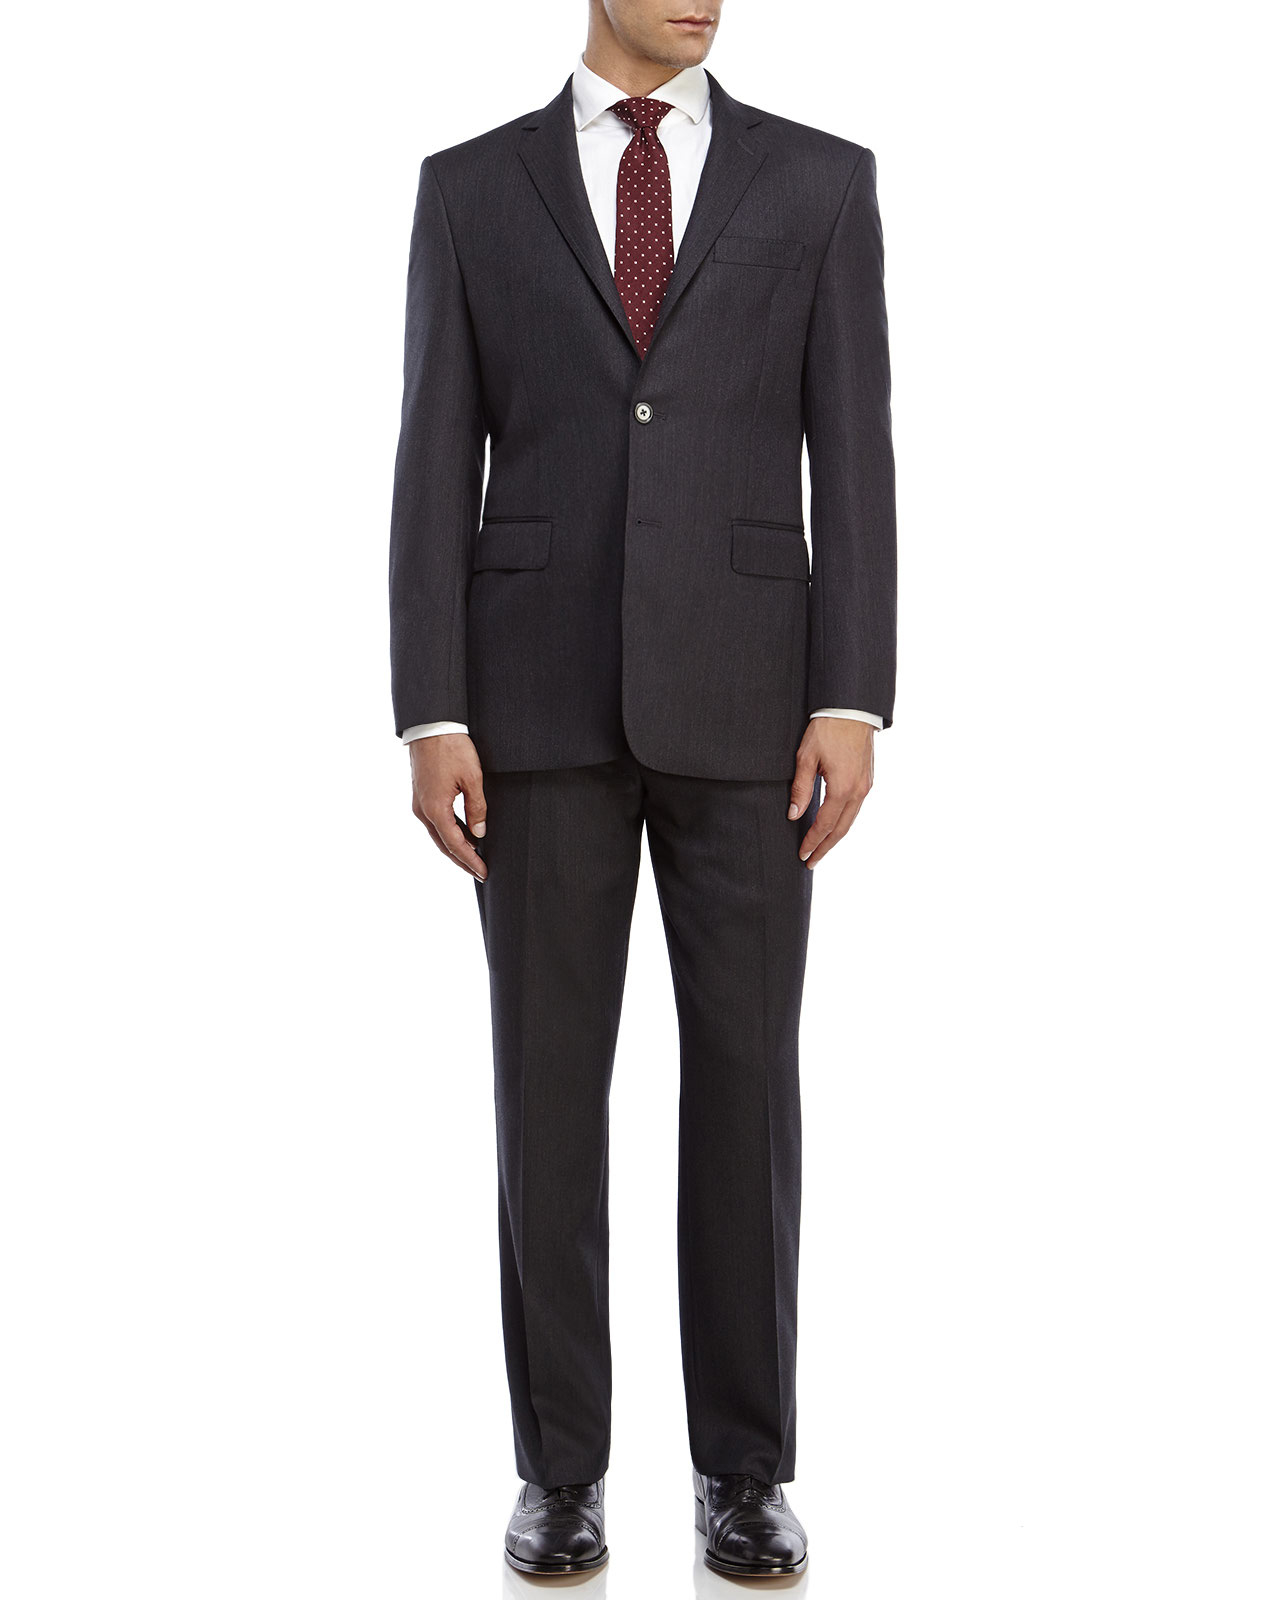 Lyst - Saint Laurent Solid Two-Button Suit in Gray for Men